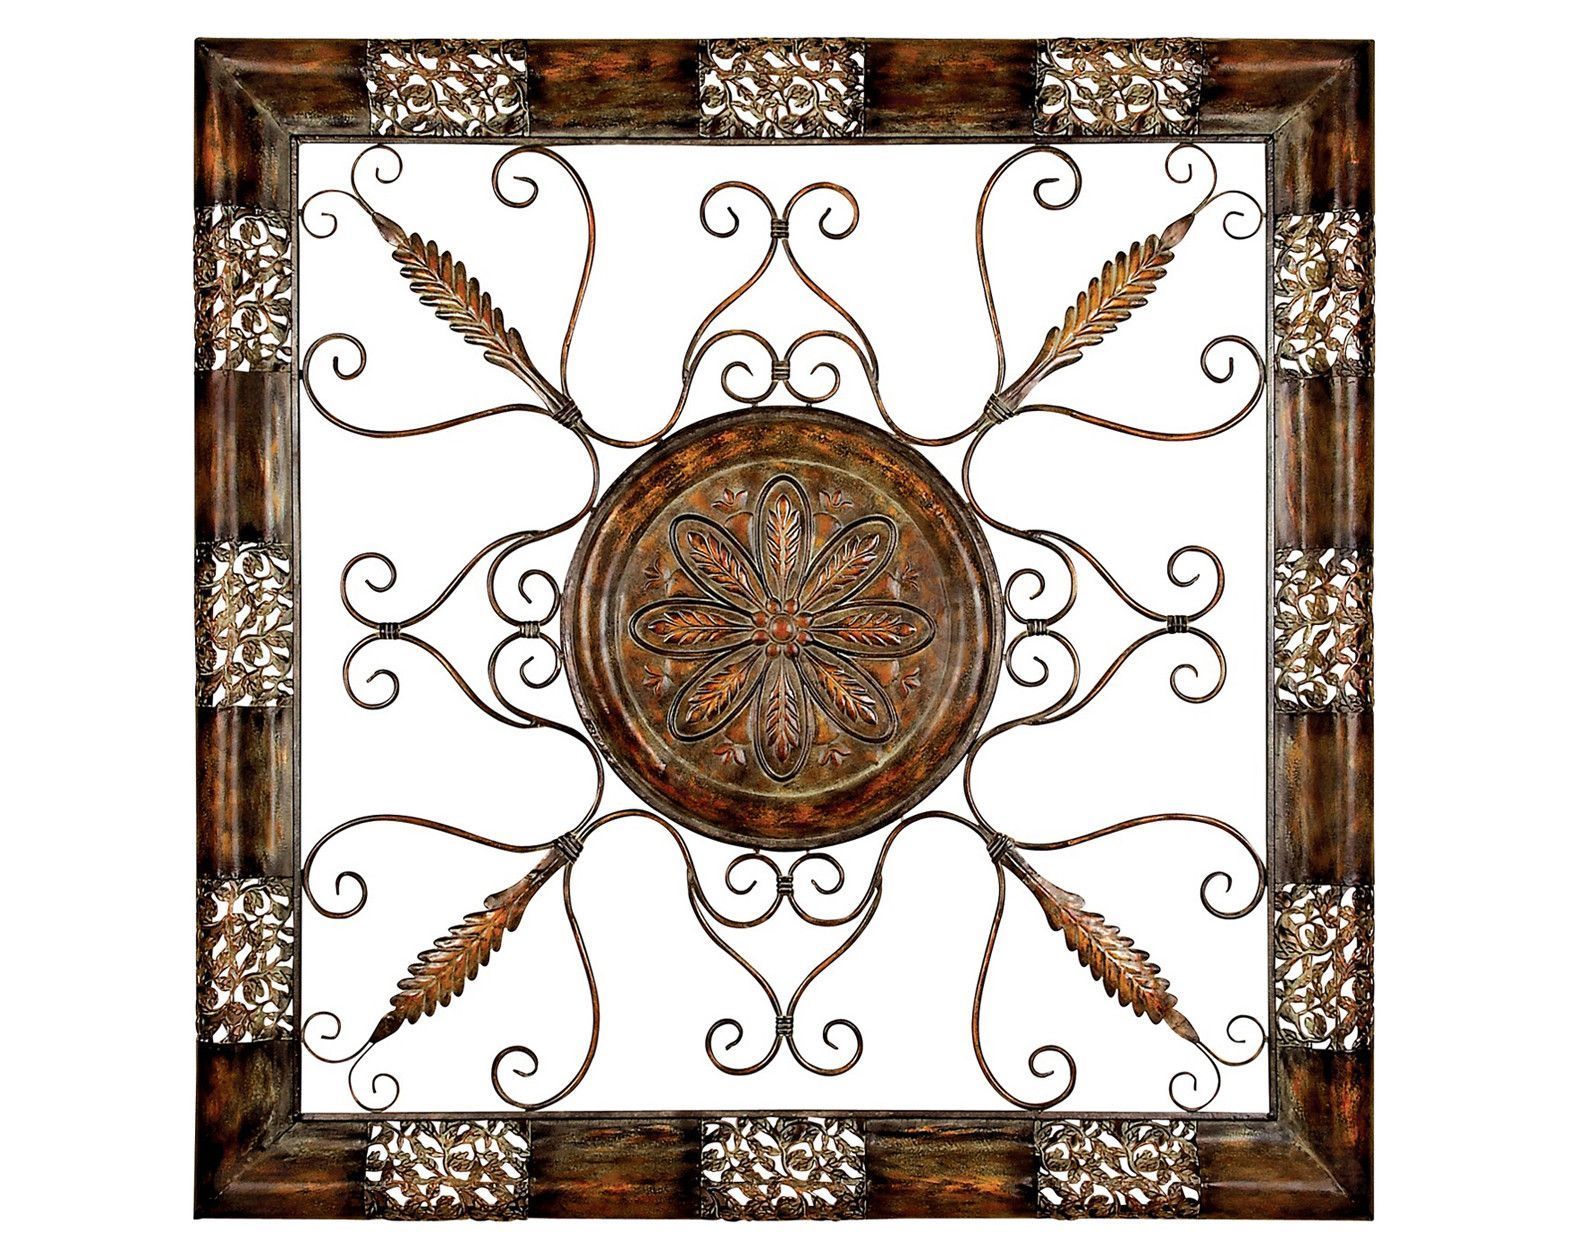 Rustic Grille Square Decorative Art | Metal Sculpture Wall Art, Wrought Throughout Newest Square Brass Wall Art (View 1 of 20)